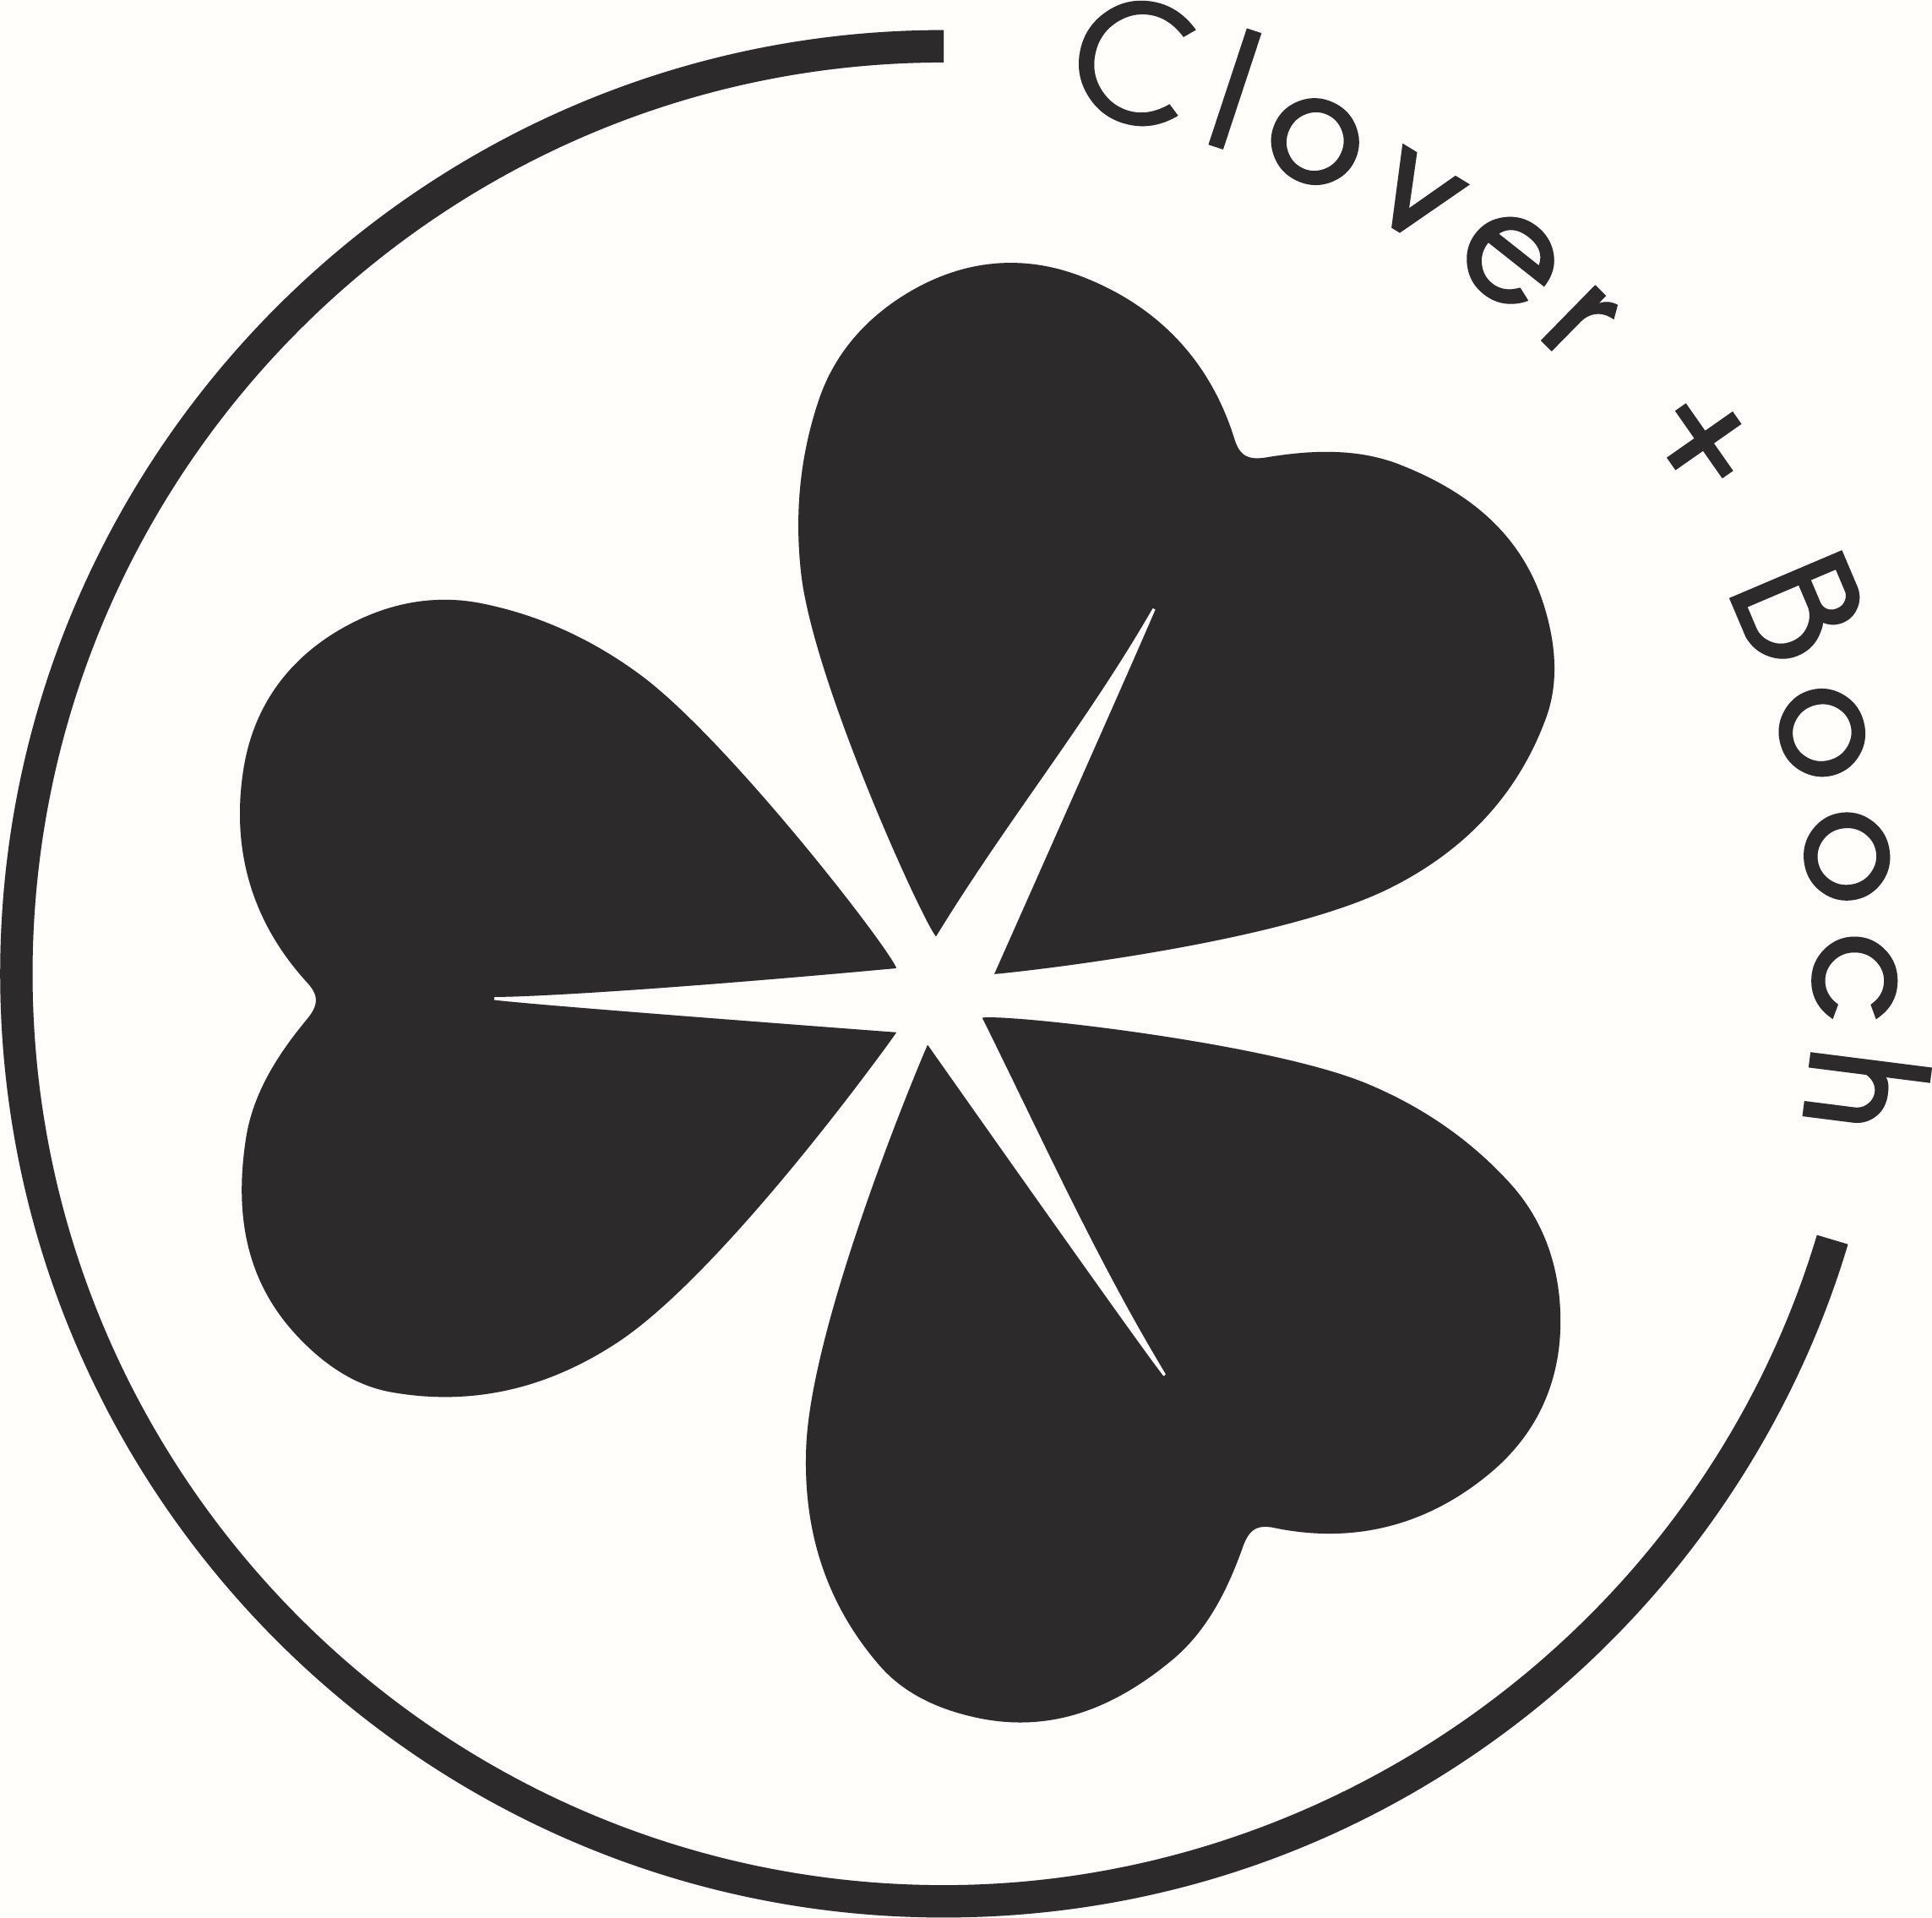 Clover and booch